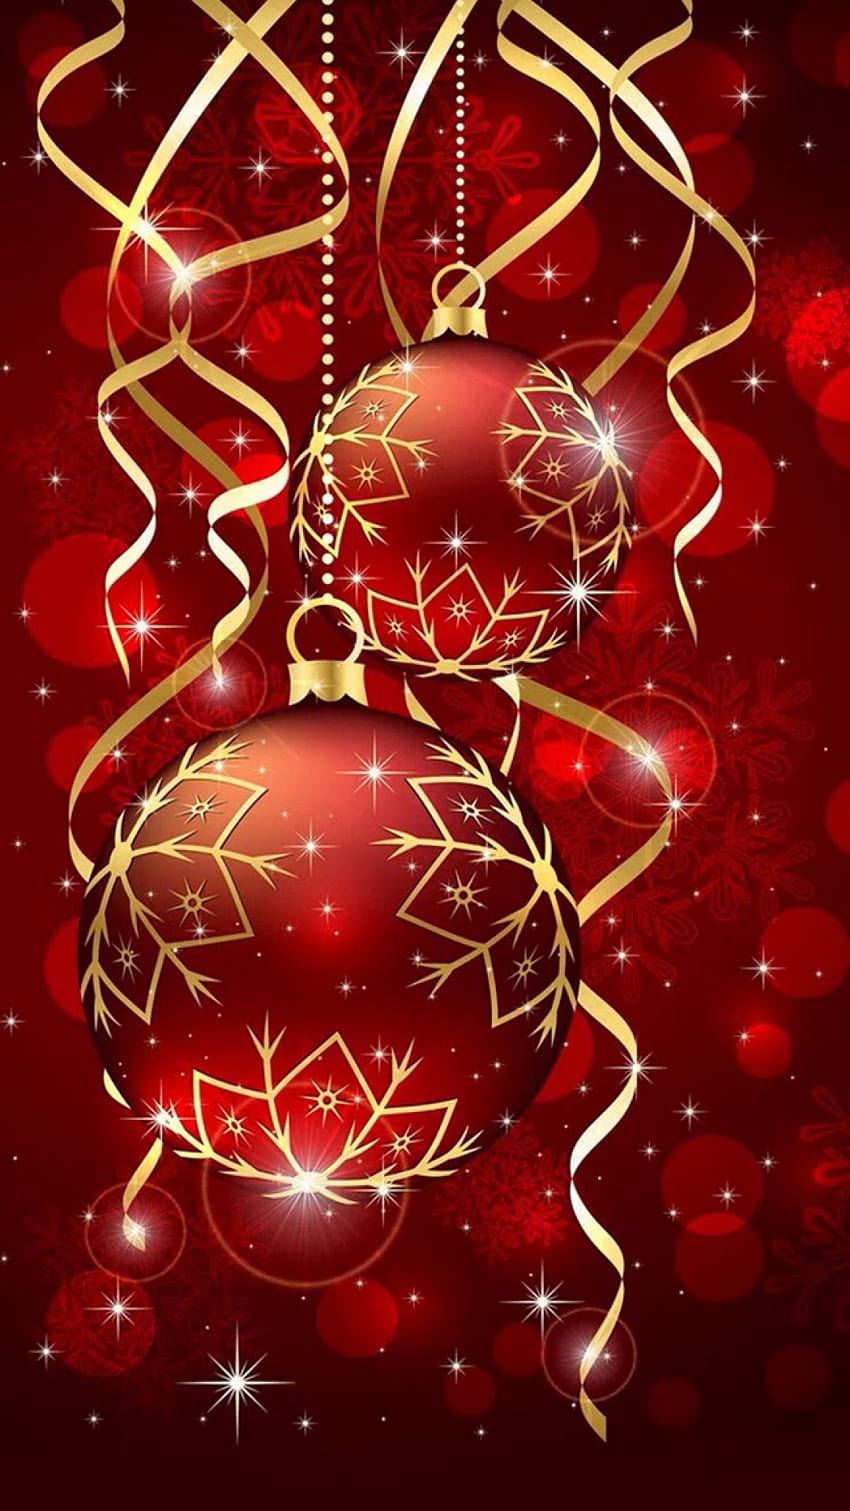 Android Best : Red Christmas Ball Ornaments Android Best, red christmas android HD phone wallpaper